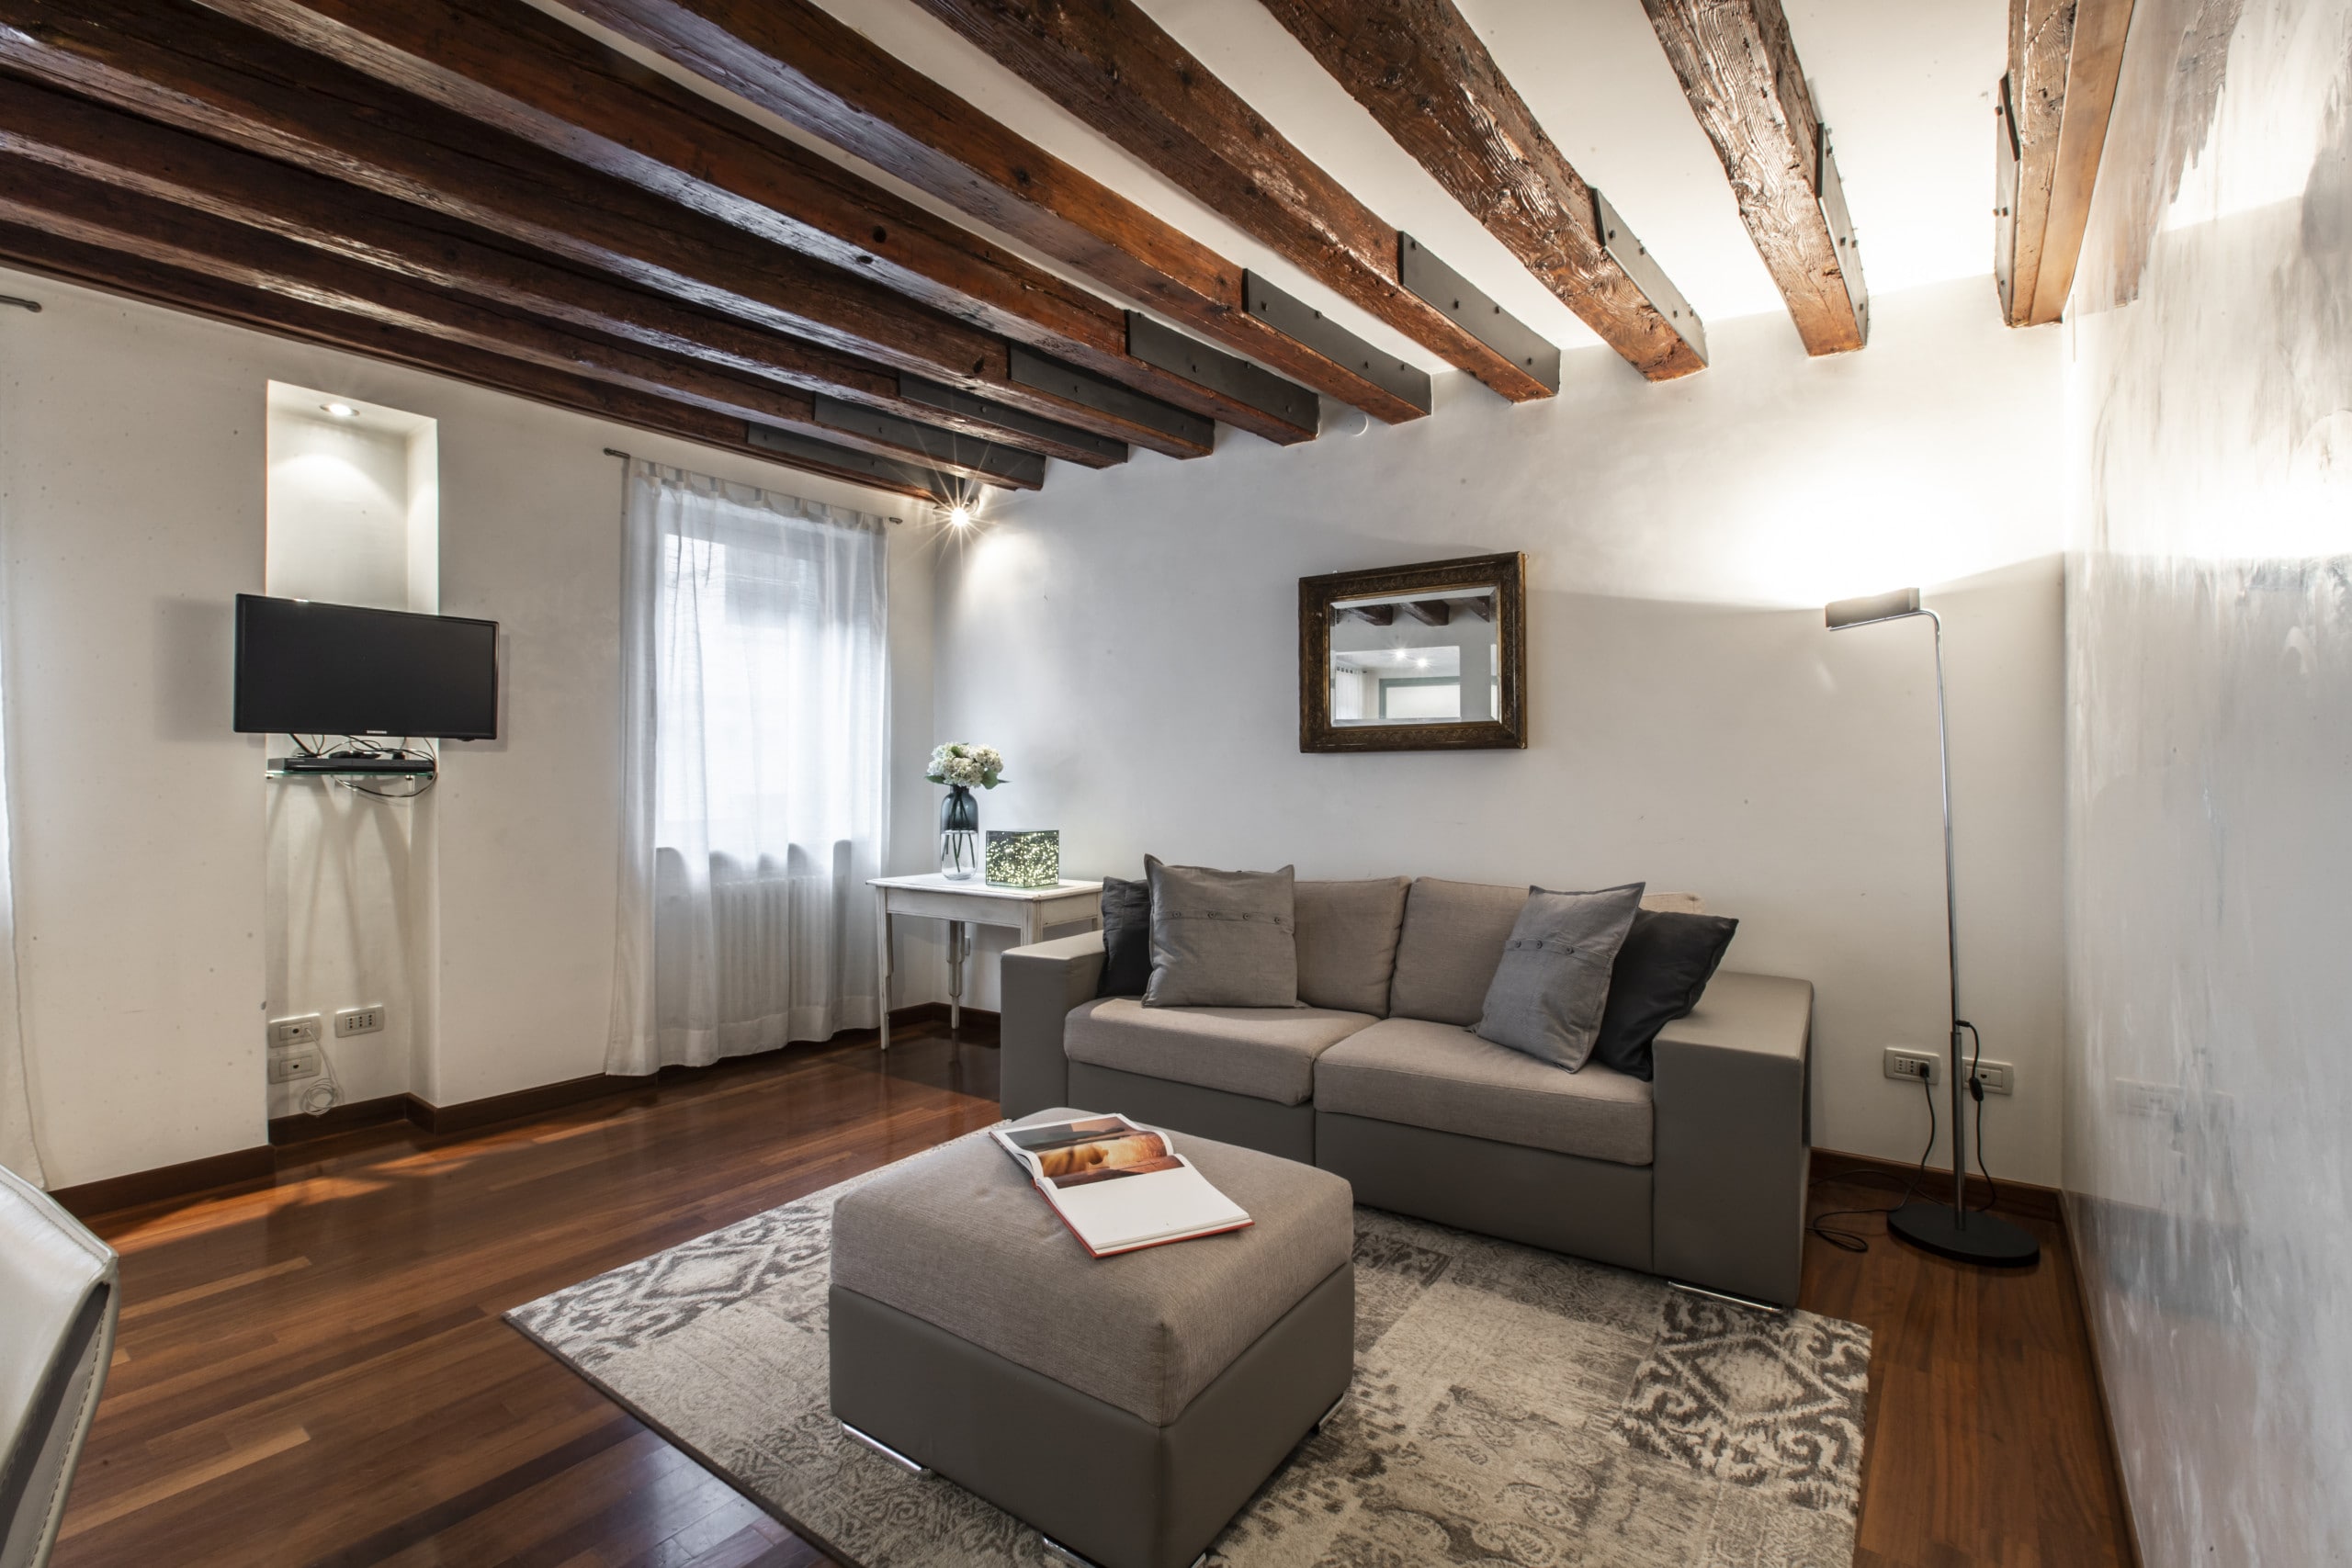 Property Image 1 - Lovley 2-bedroom apartment located near Piazza San Marco